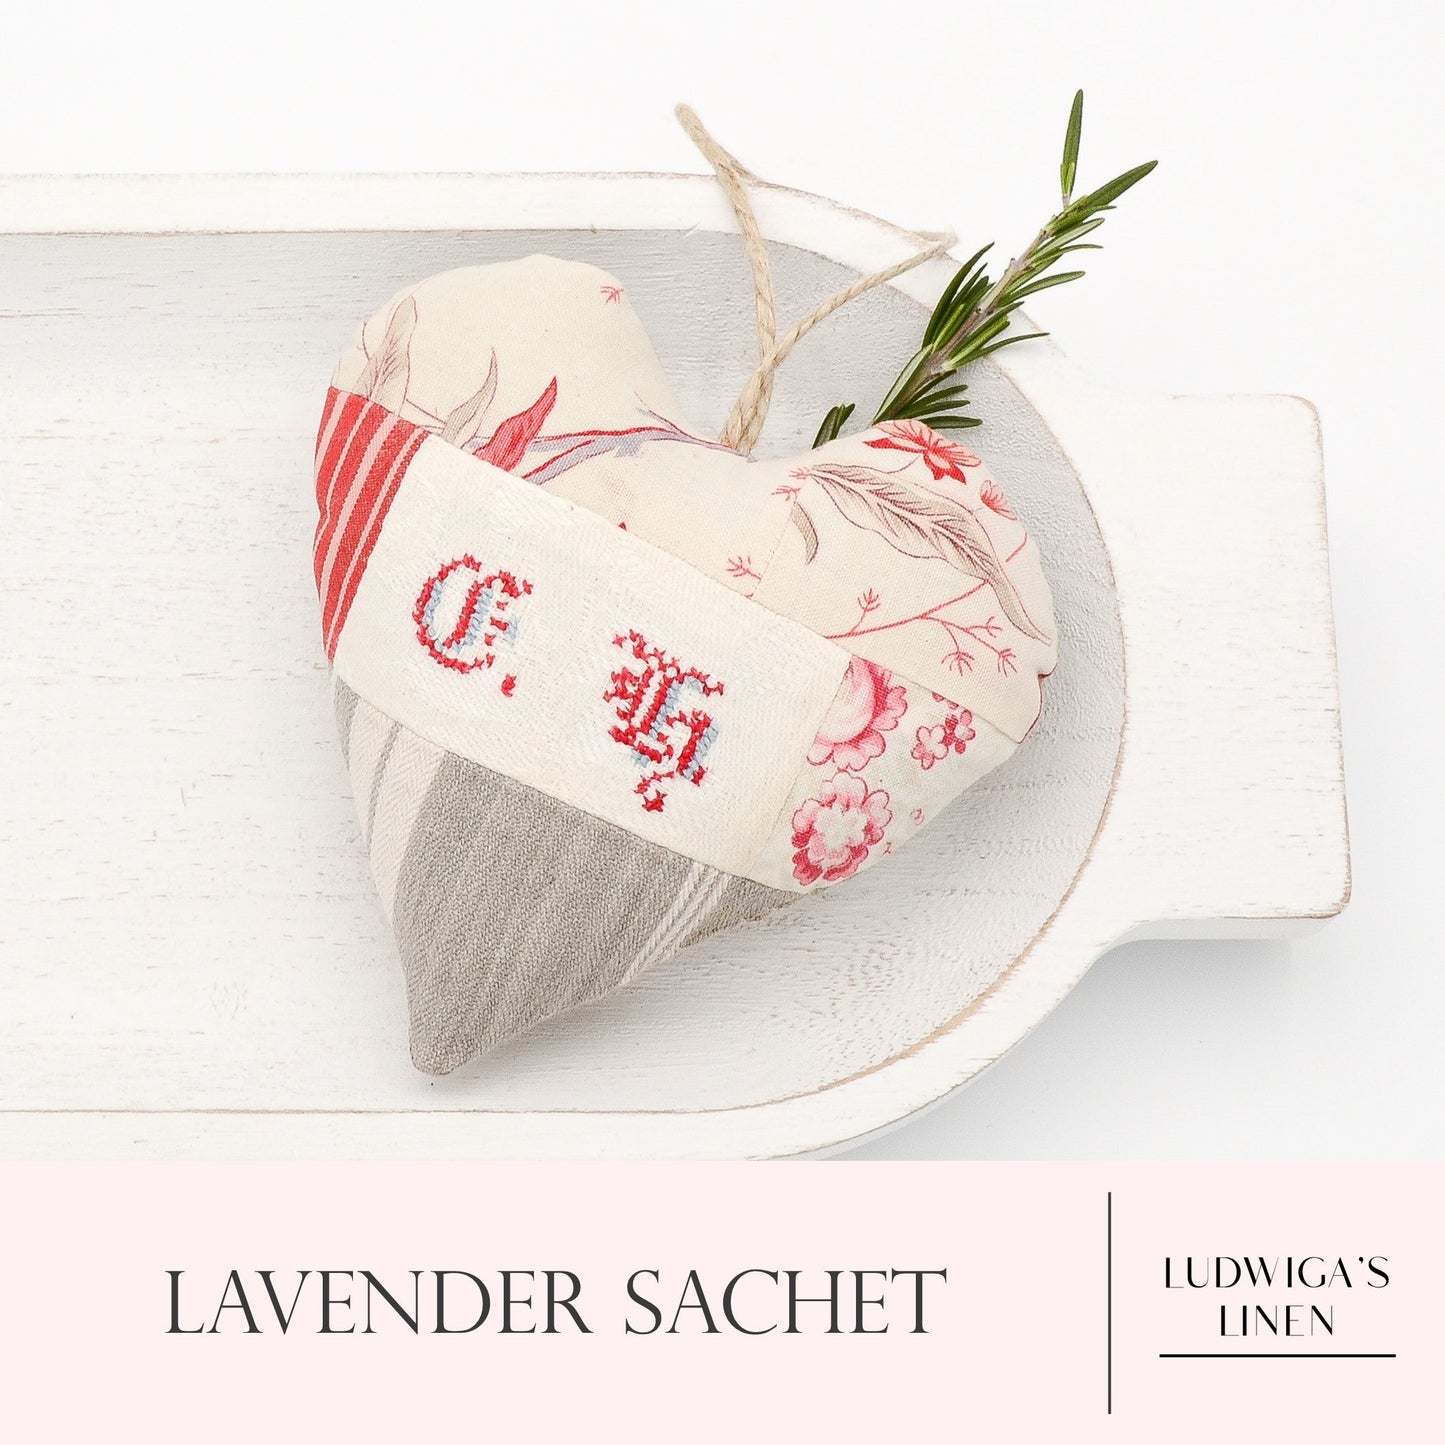 Antique/vintage French cotton and linen lavender sachet heart, hemp twine tie and filled with high quality lavender from Provence France